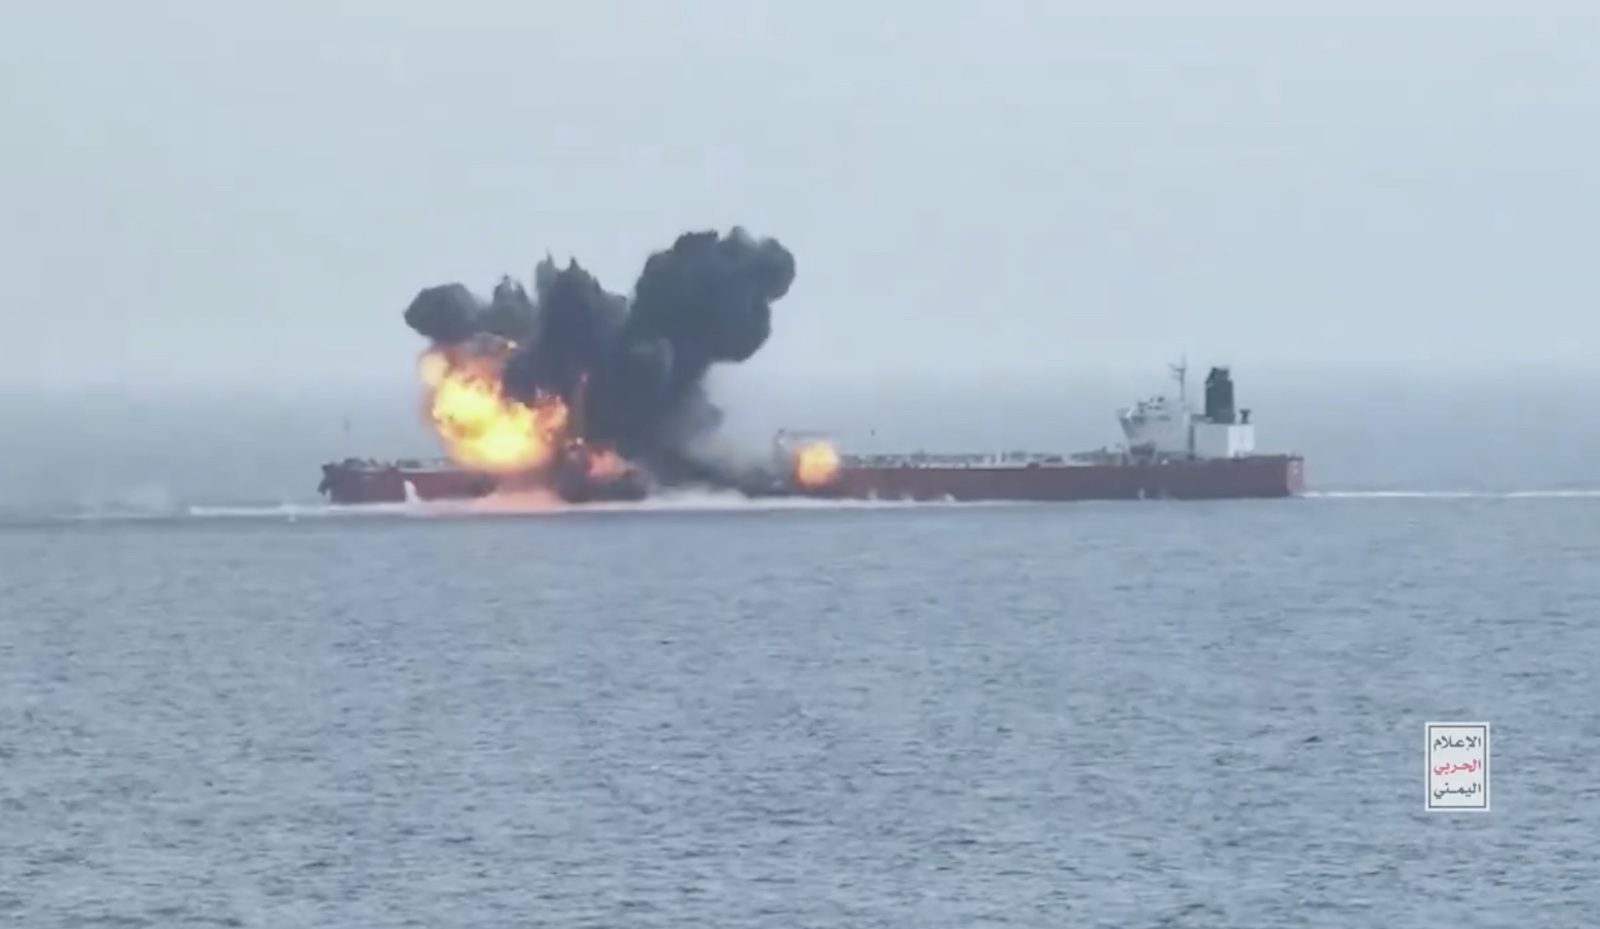 Houthi surface drone attacks tanker in Red Sea